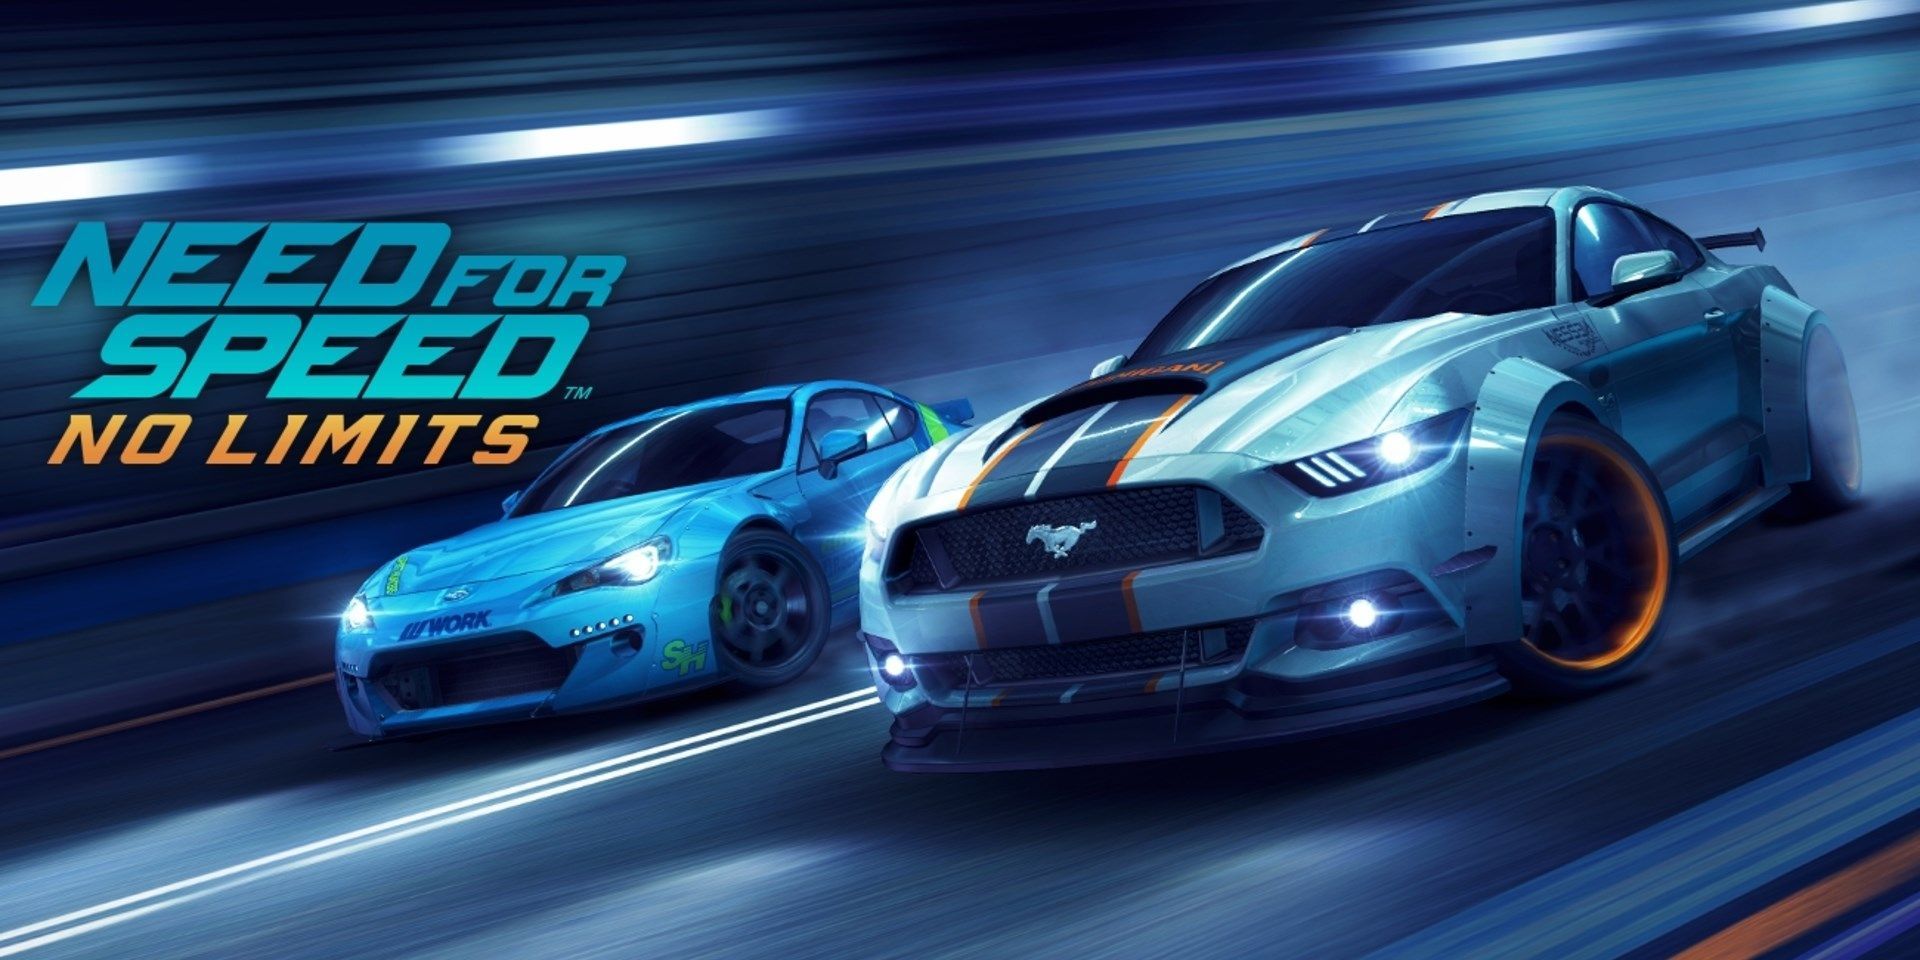 widescreen wallpaper need for speed no limits. Need for speed